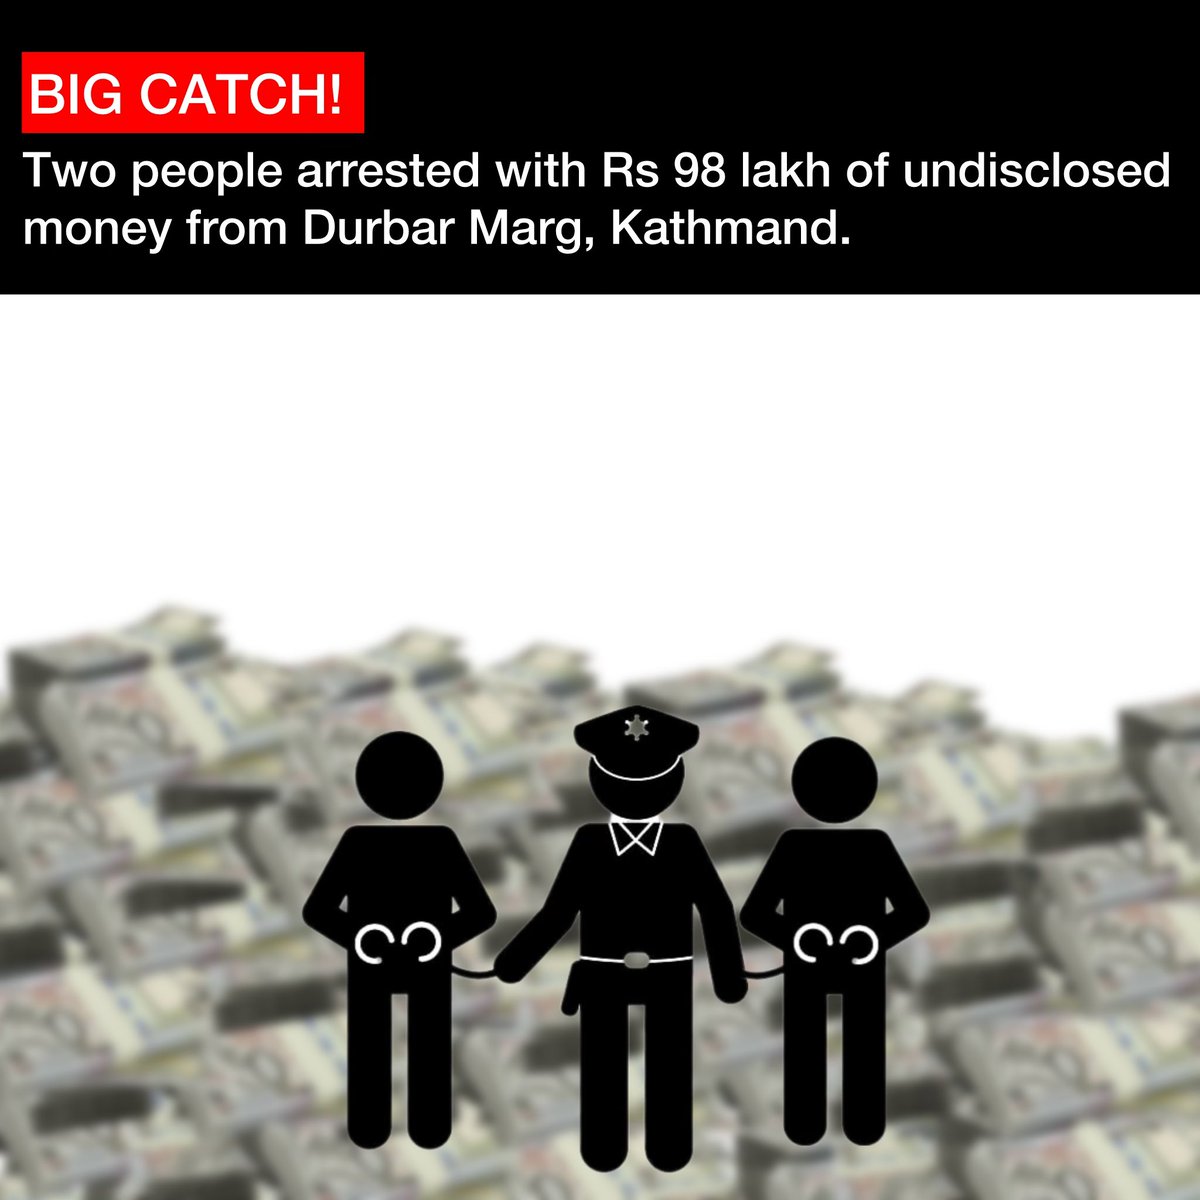 BIG CATCH: Police have arrested 2 people with 98 lakh rupees of undisclosed money on Durbar Marg in Kathmandu. The arrested individuals are from Butwal. Further investigation is underway. #nonextquestion